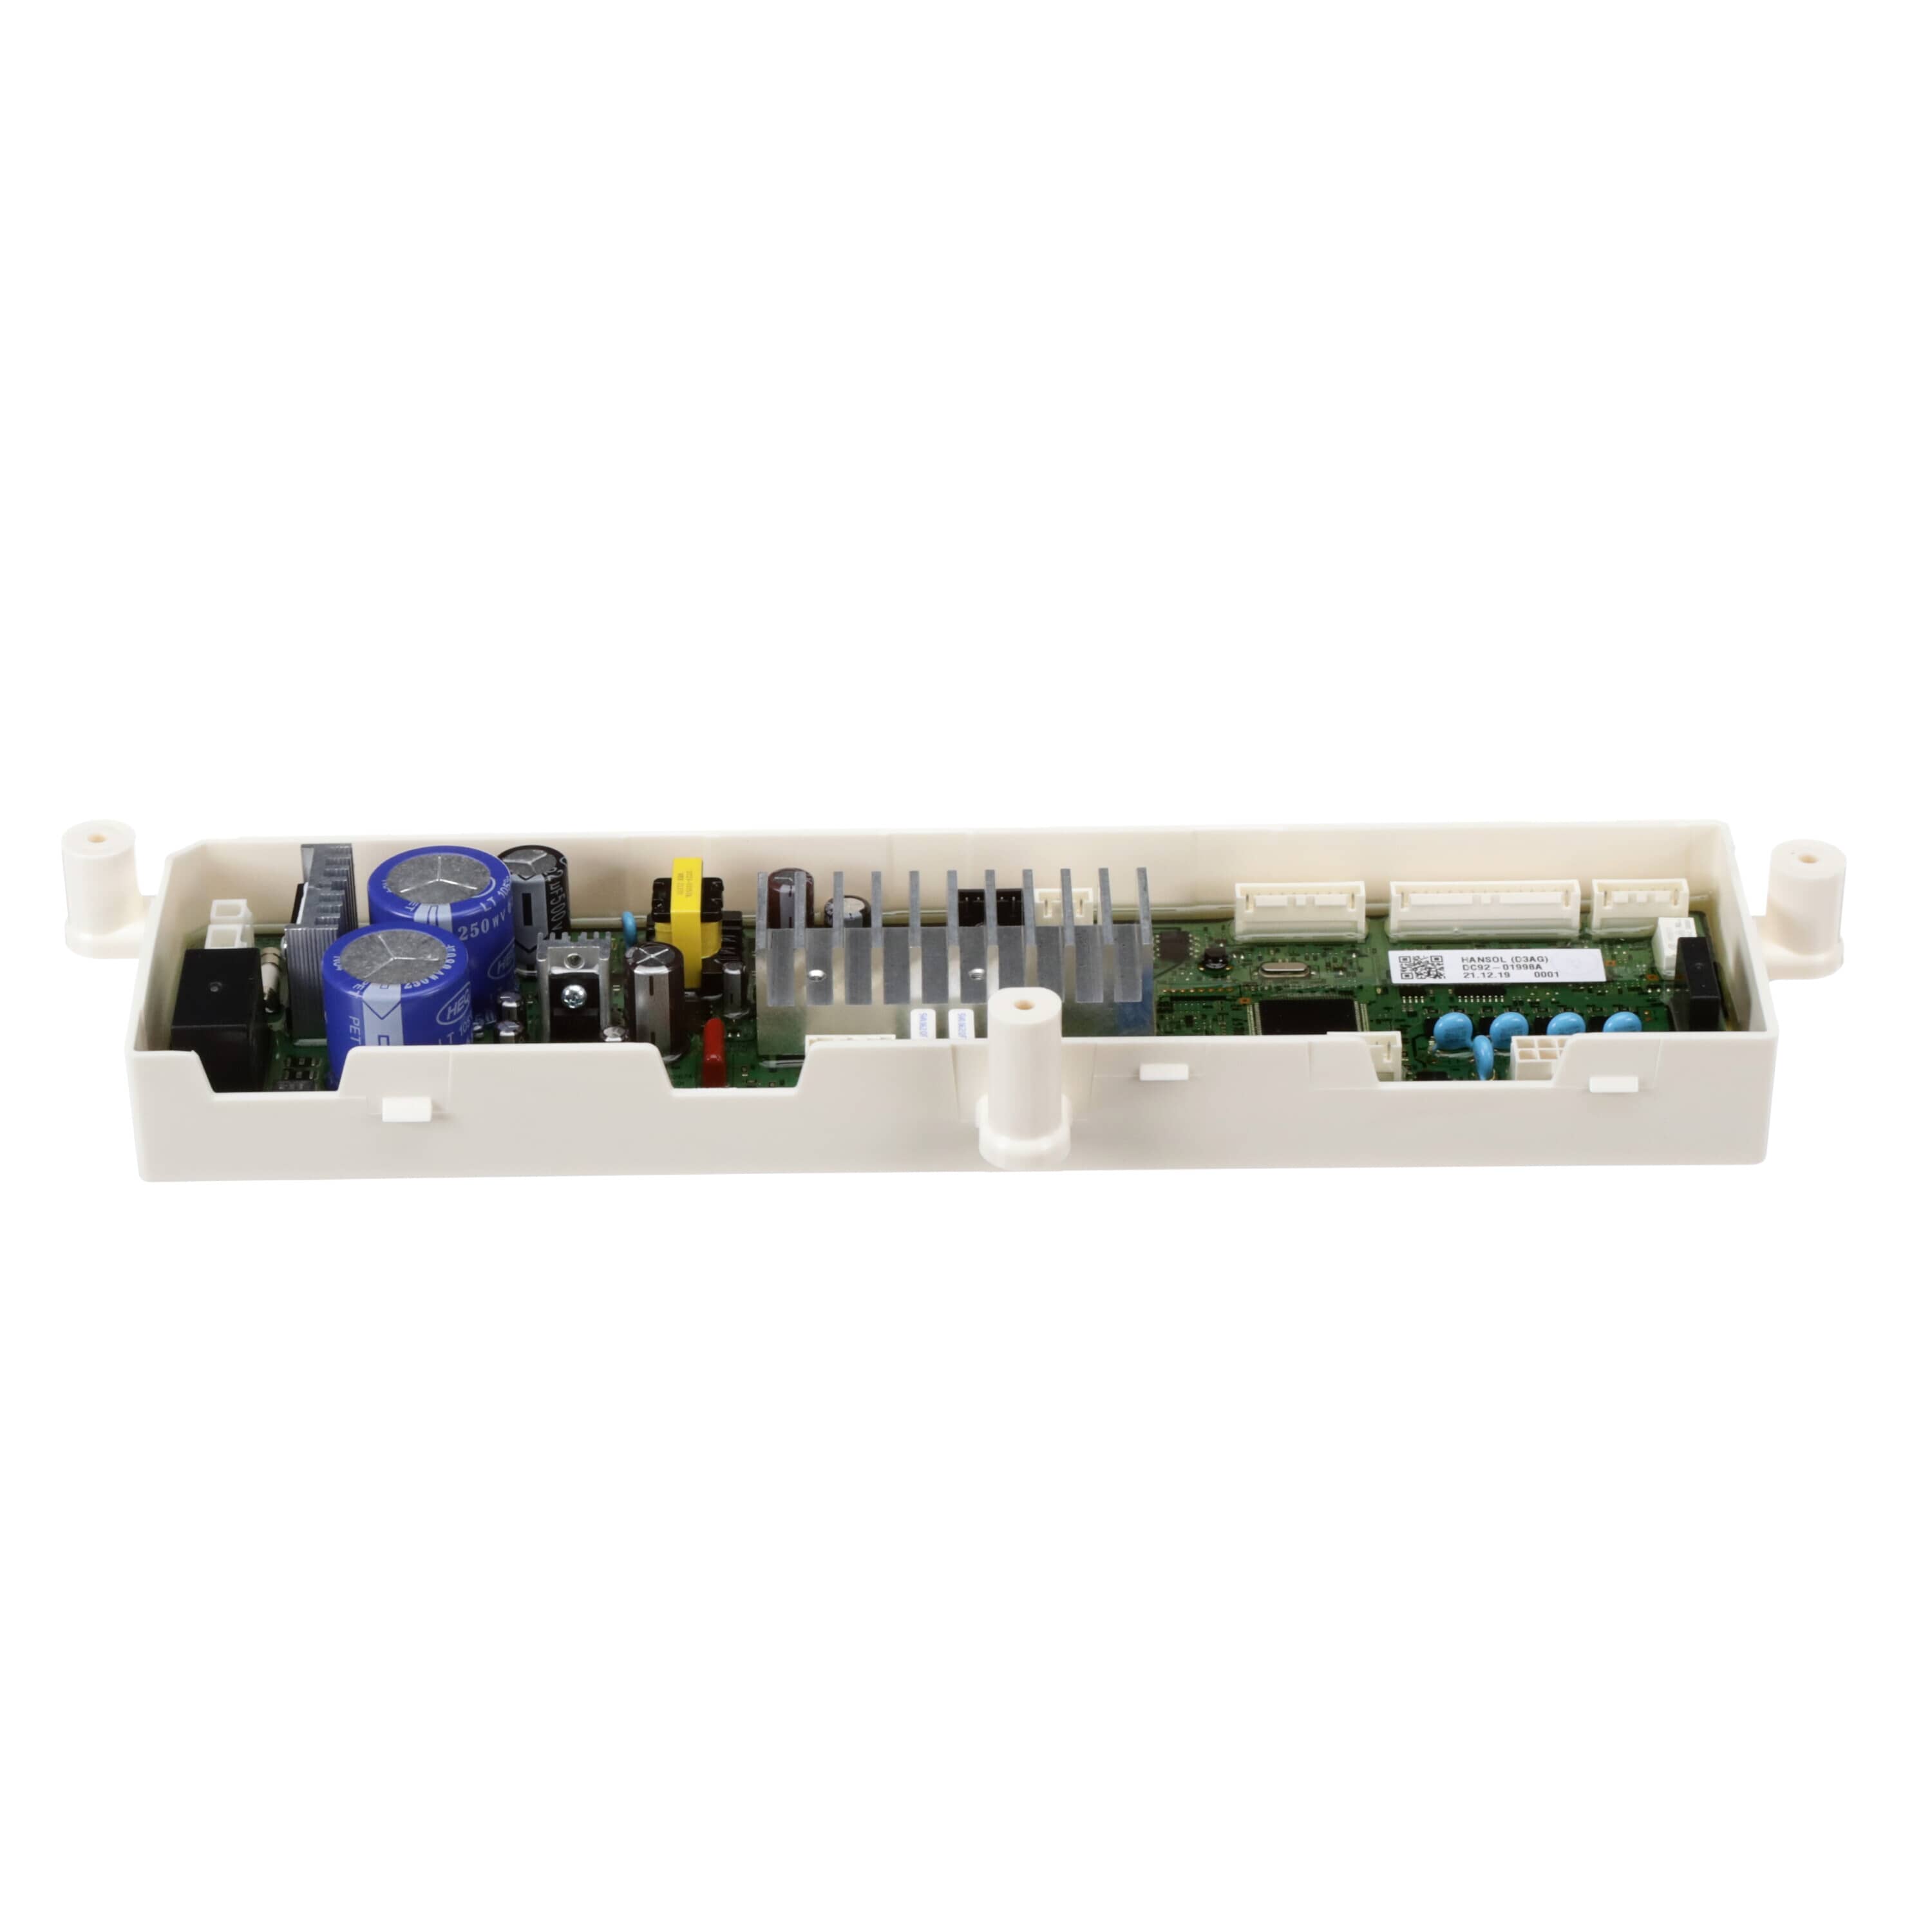 Samsung DC92-01998A Washer Electronic Control Board